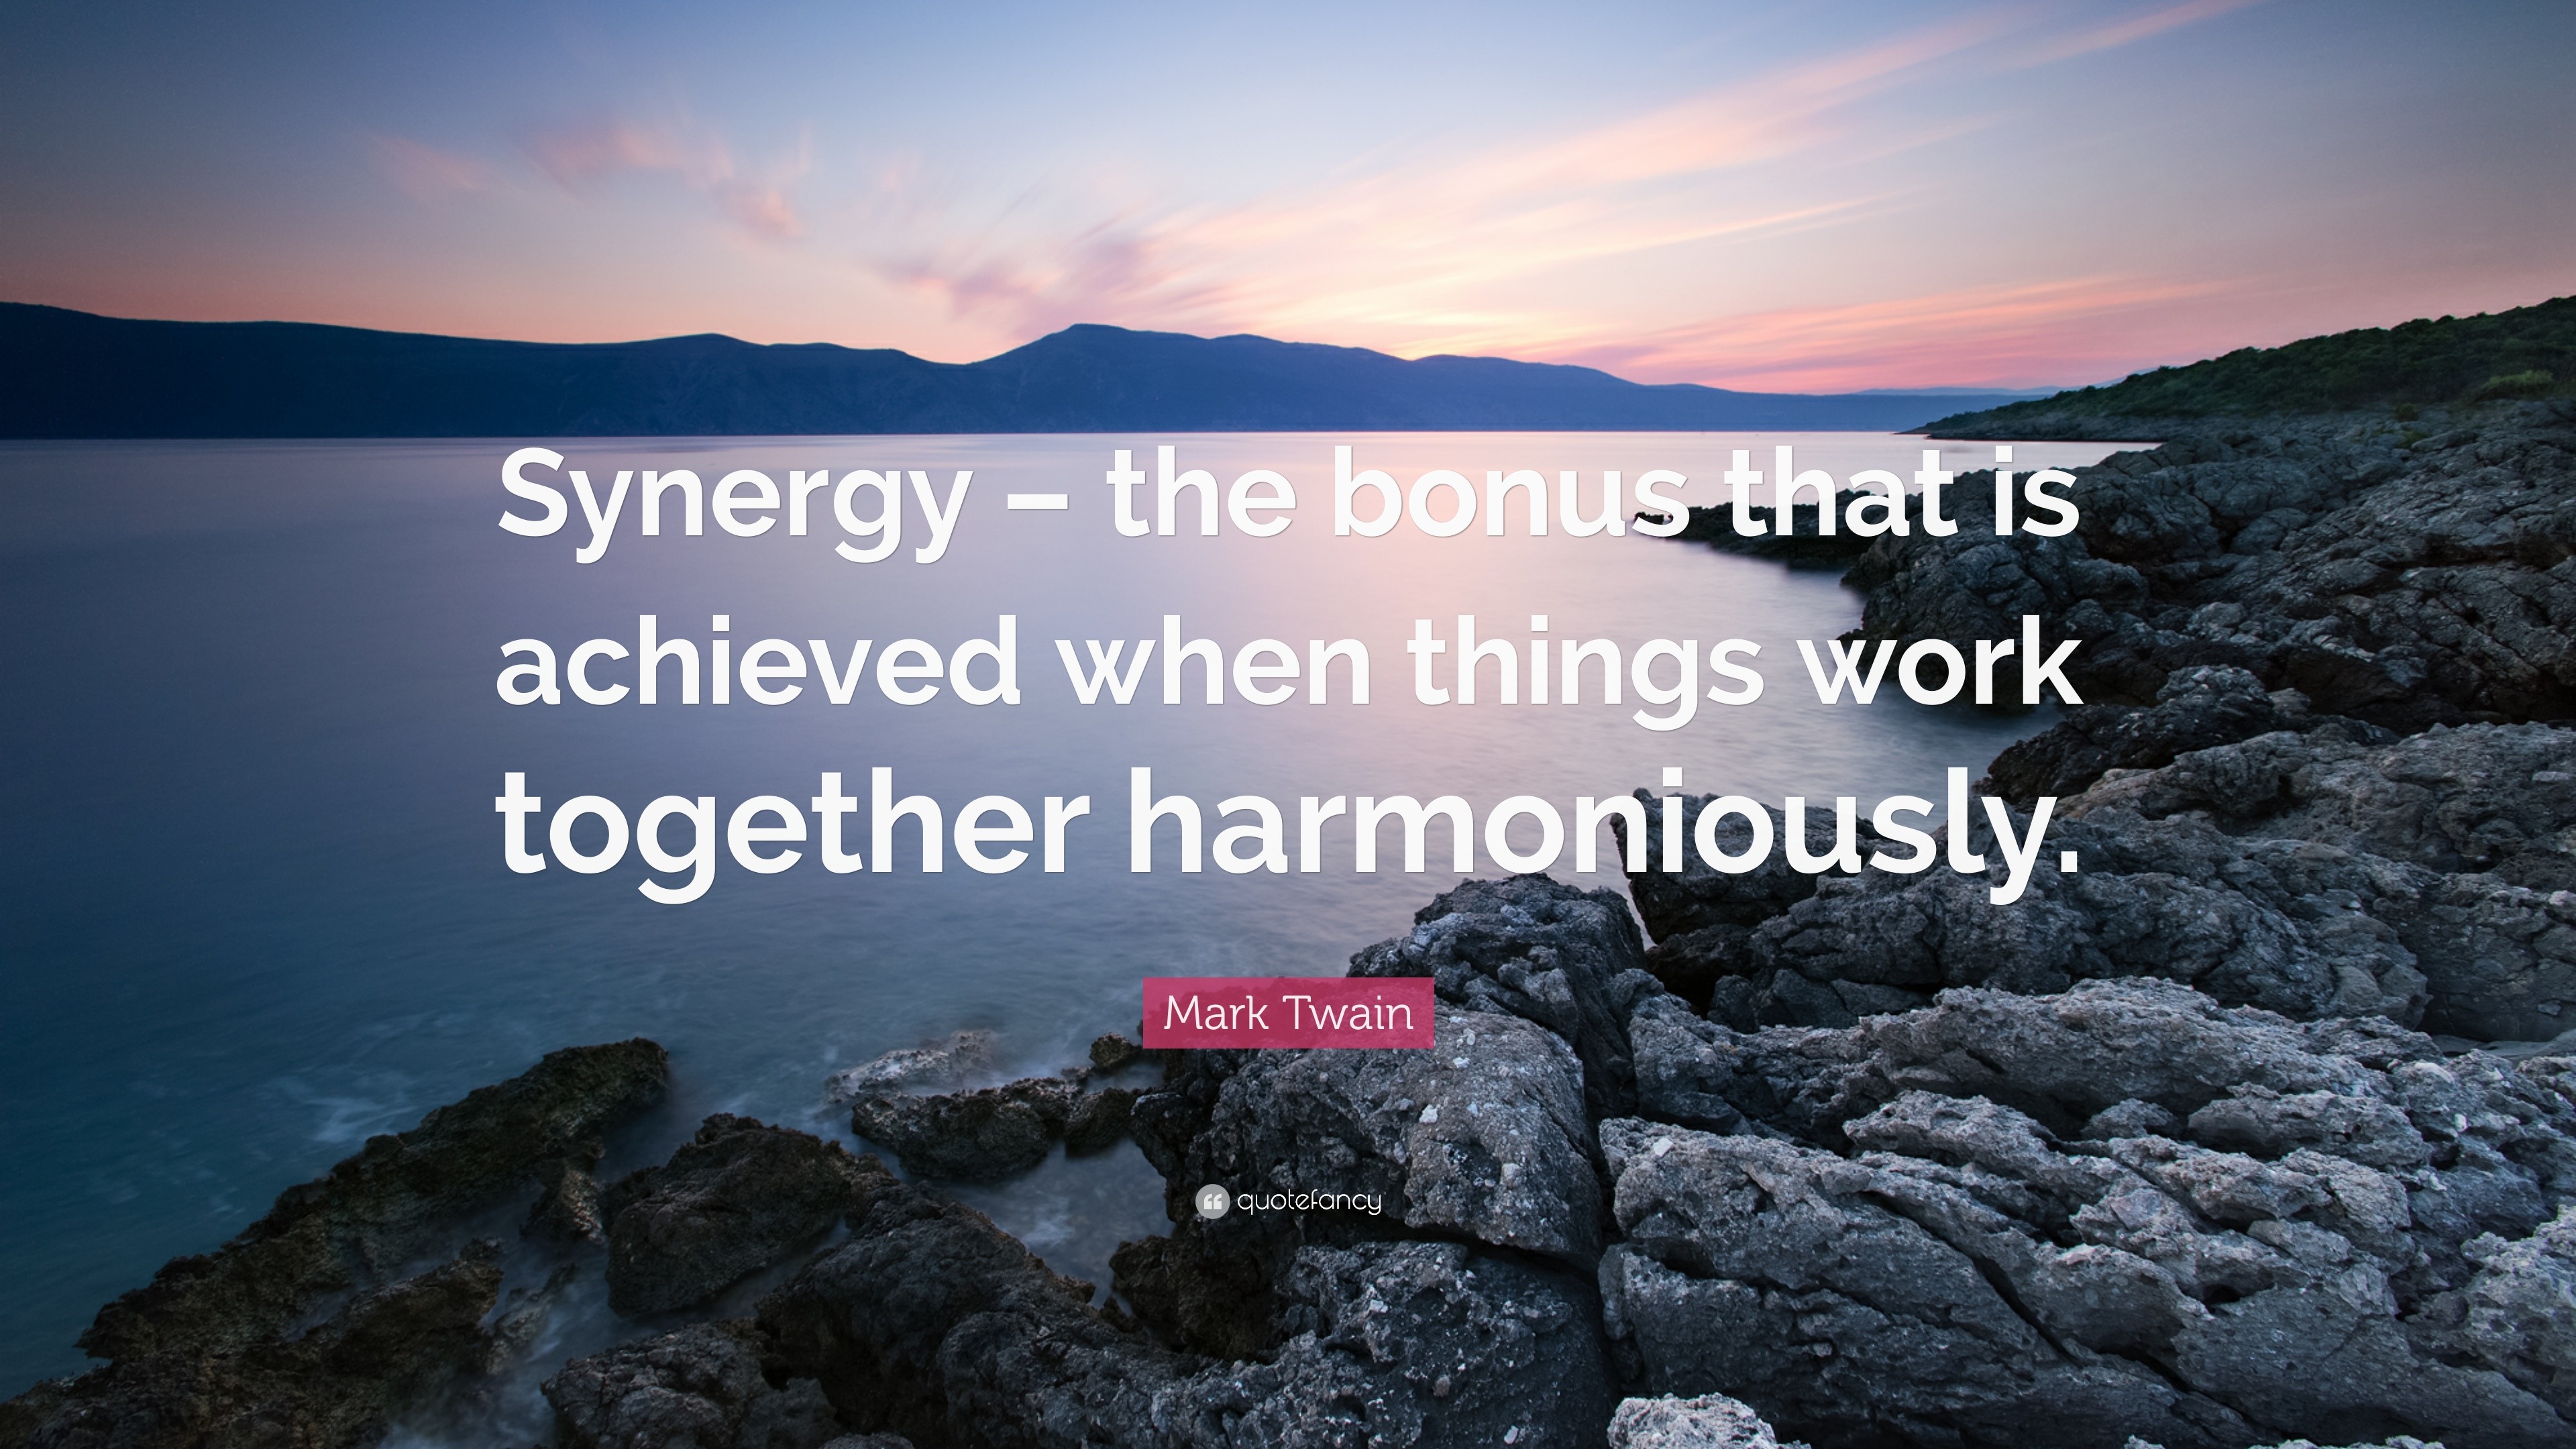  Teamwork Quotes  40 wallpapers Quotefancy